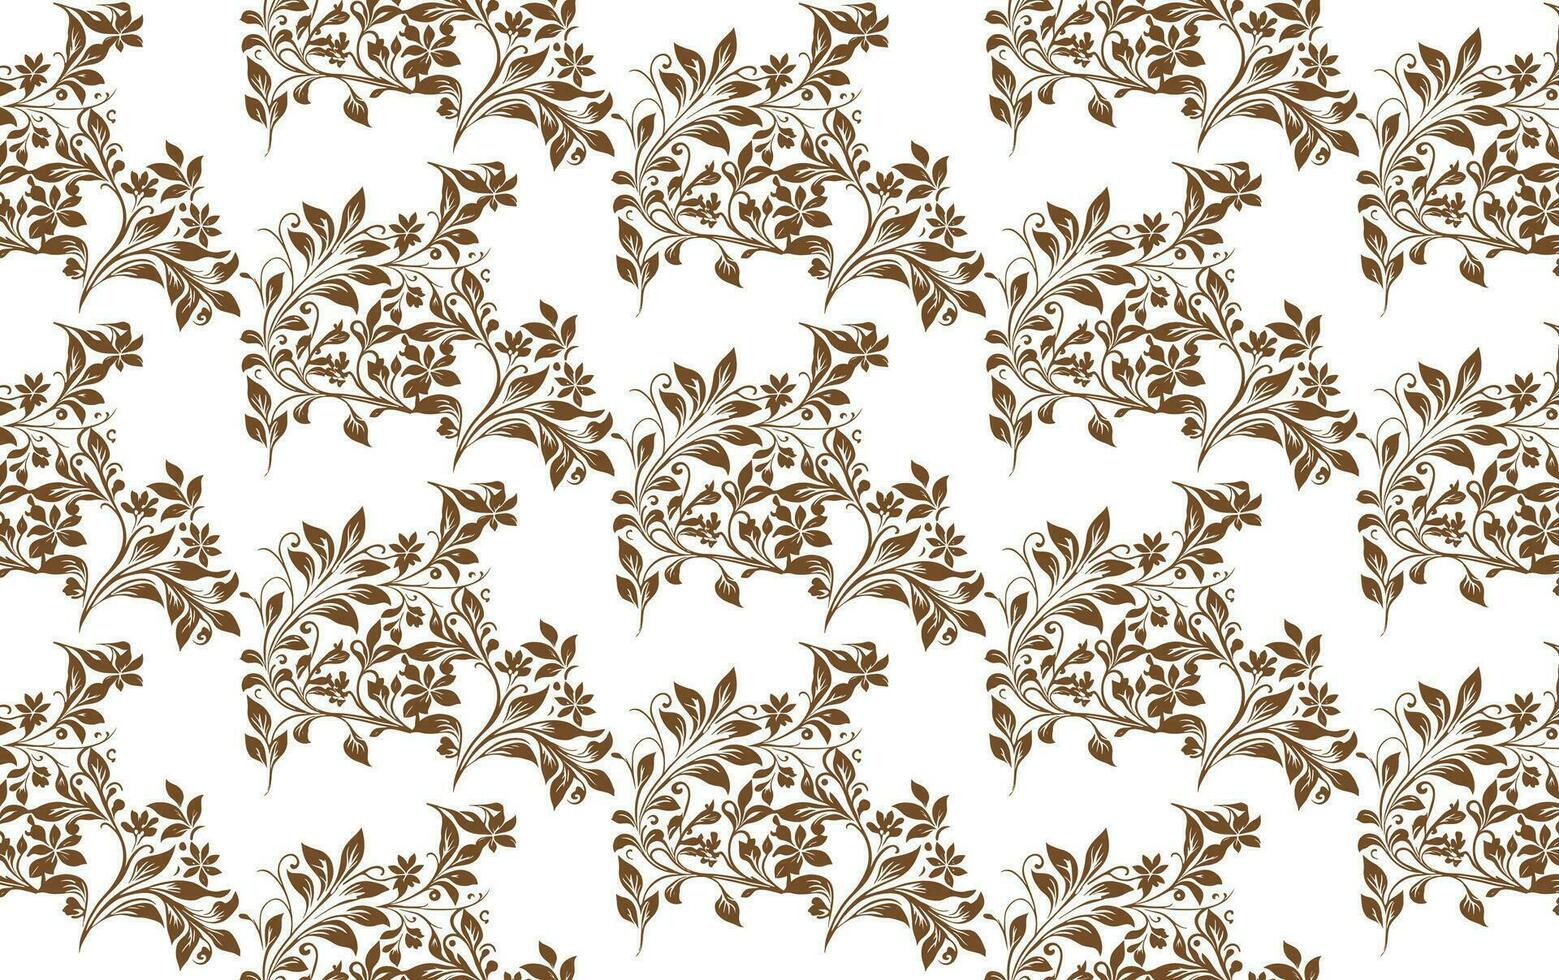 Brown Floral Pattern on a White Background vector